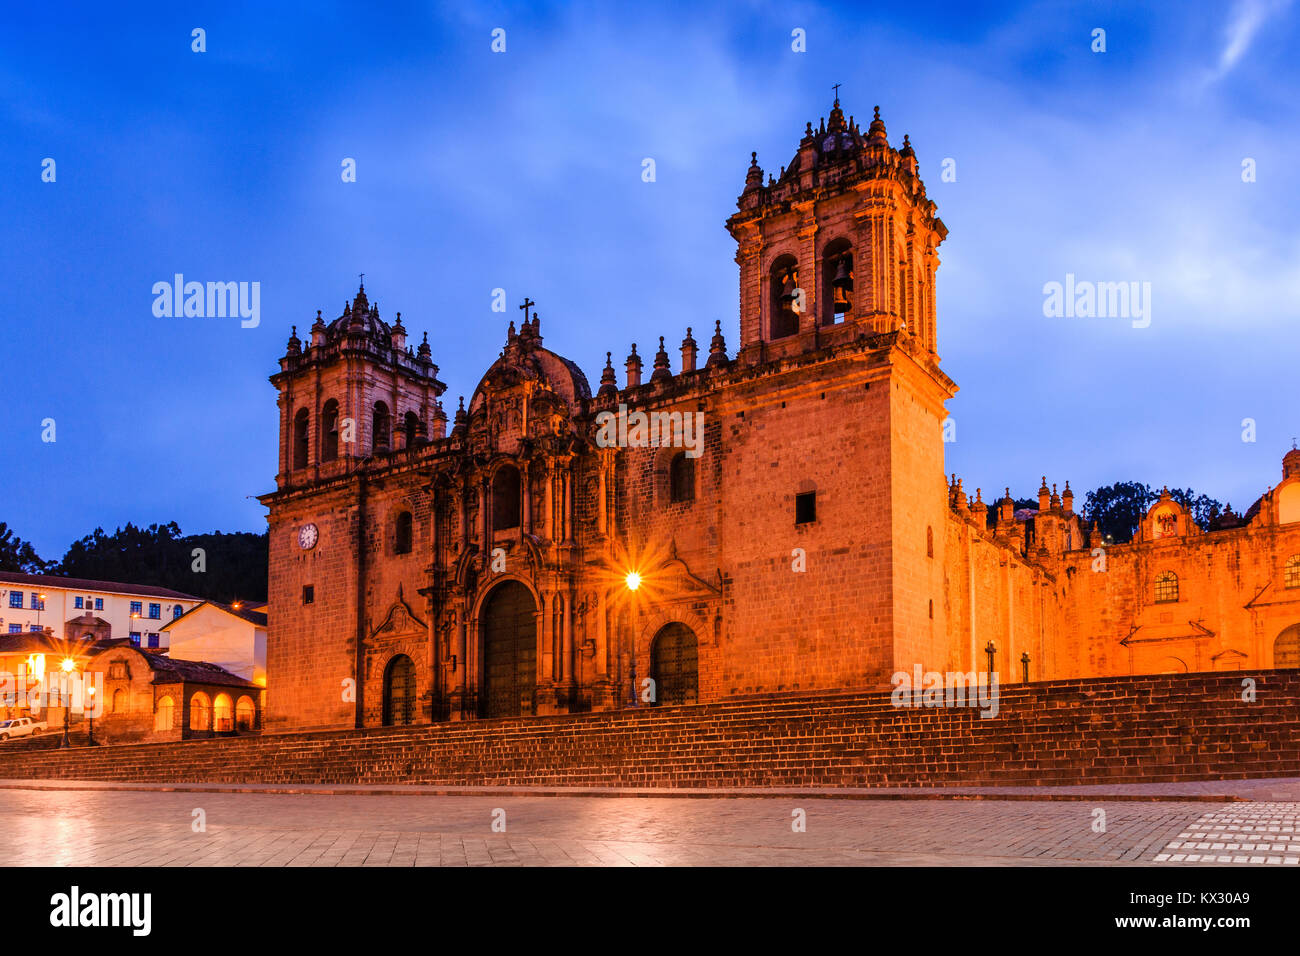 Cusco, Peru. The Cathedral Basilica of the Assumption of the Virgin, also known as Cusco Cathedral. Stock Photo